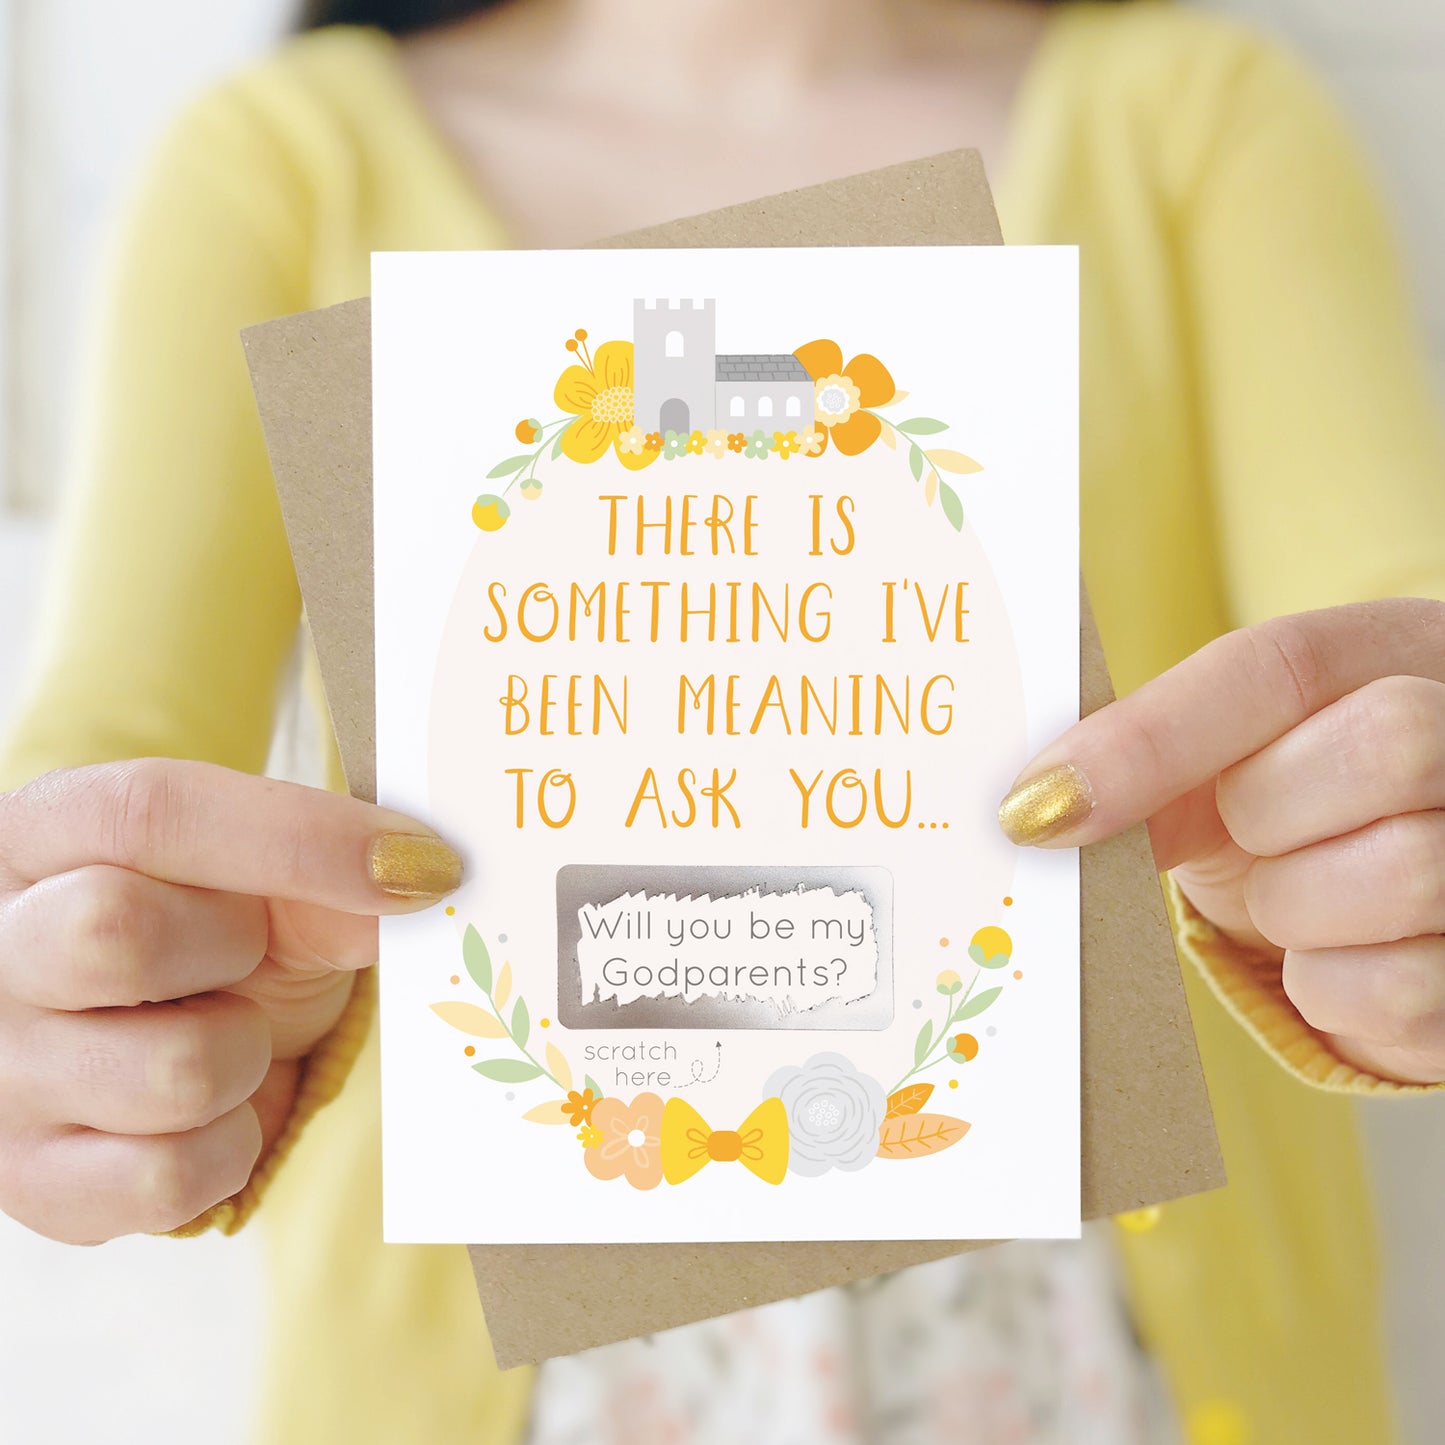 A will you be my godparents scratch and reveal card being held in front of a white dress and yellow cardigan. The design features a church, simple florals and a scratch off panel in silver. This is the yellow palette.